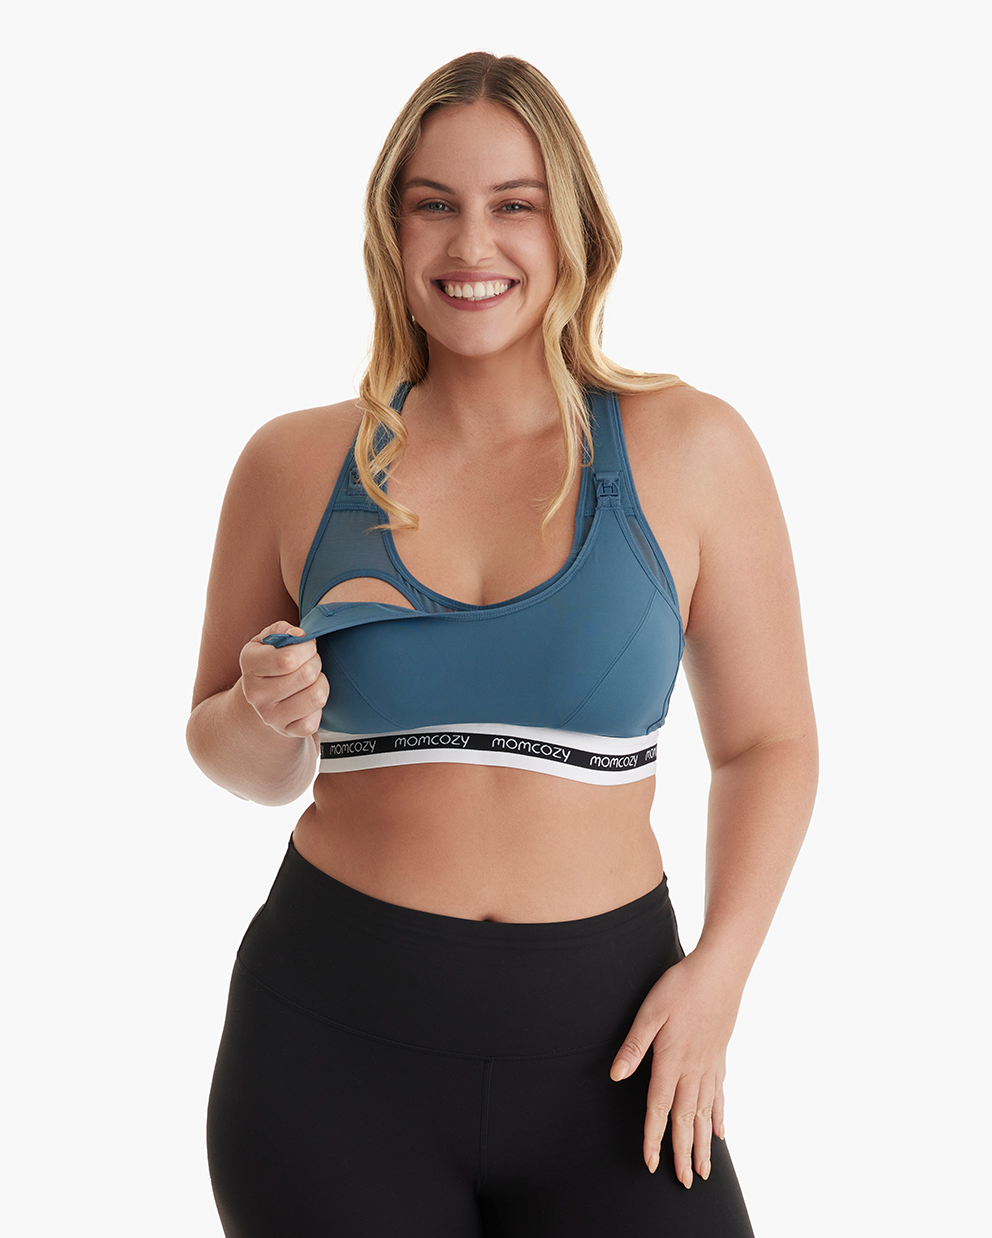 Momcozy's New Bras Redefine Comfort and Style for